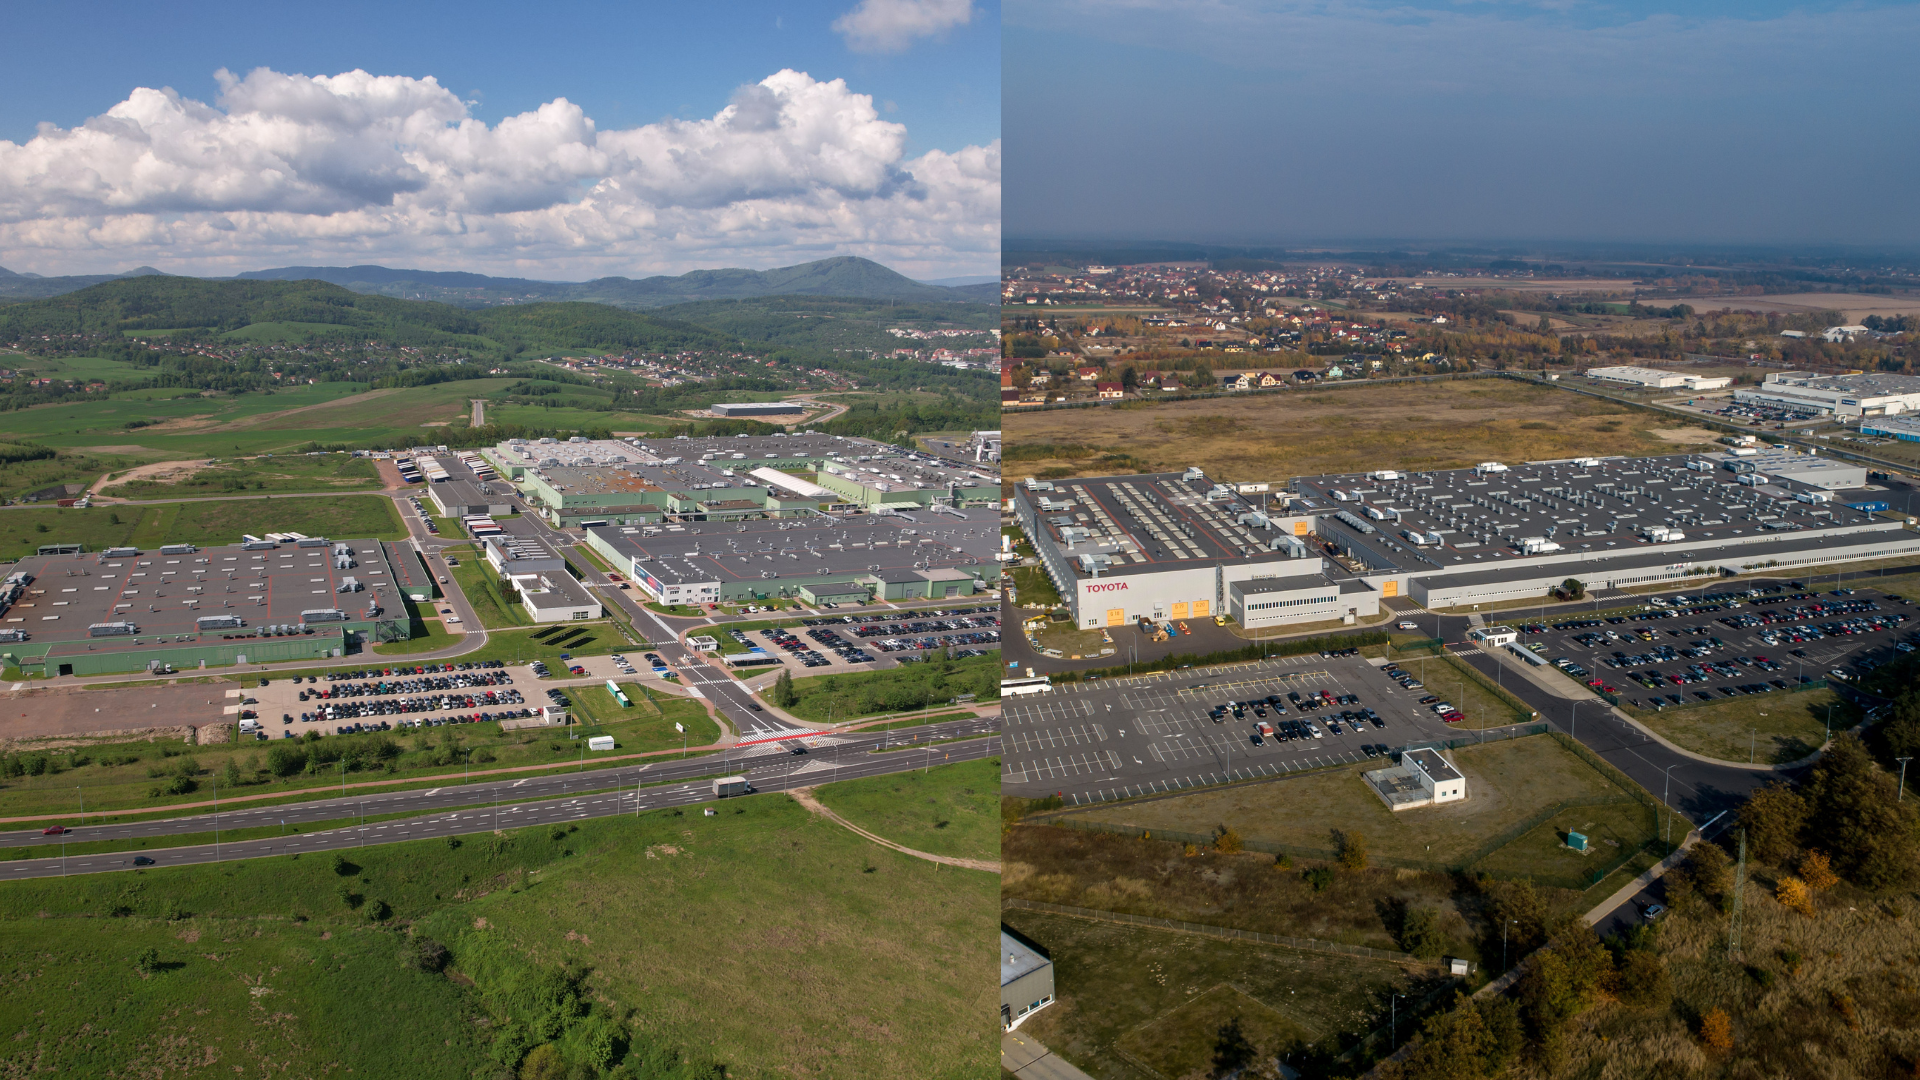 Toyota’s 20th anniversary of production in Poland